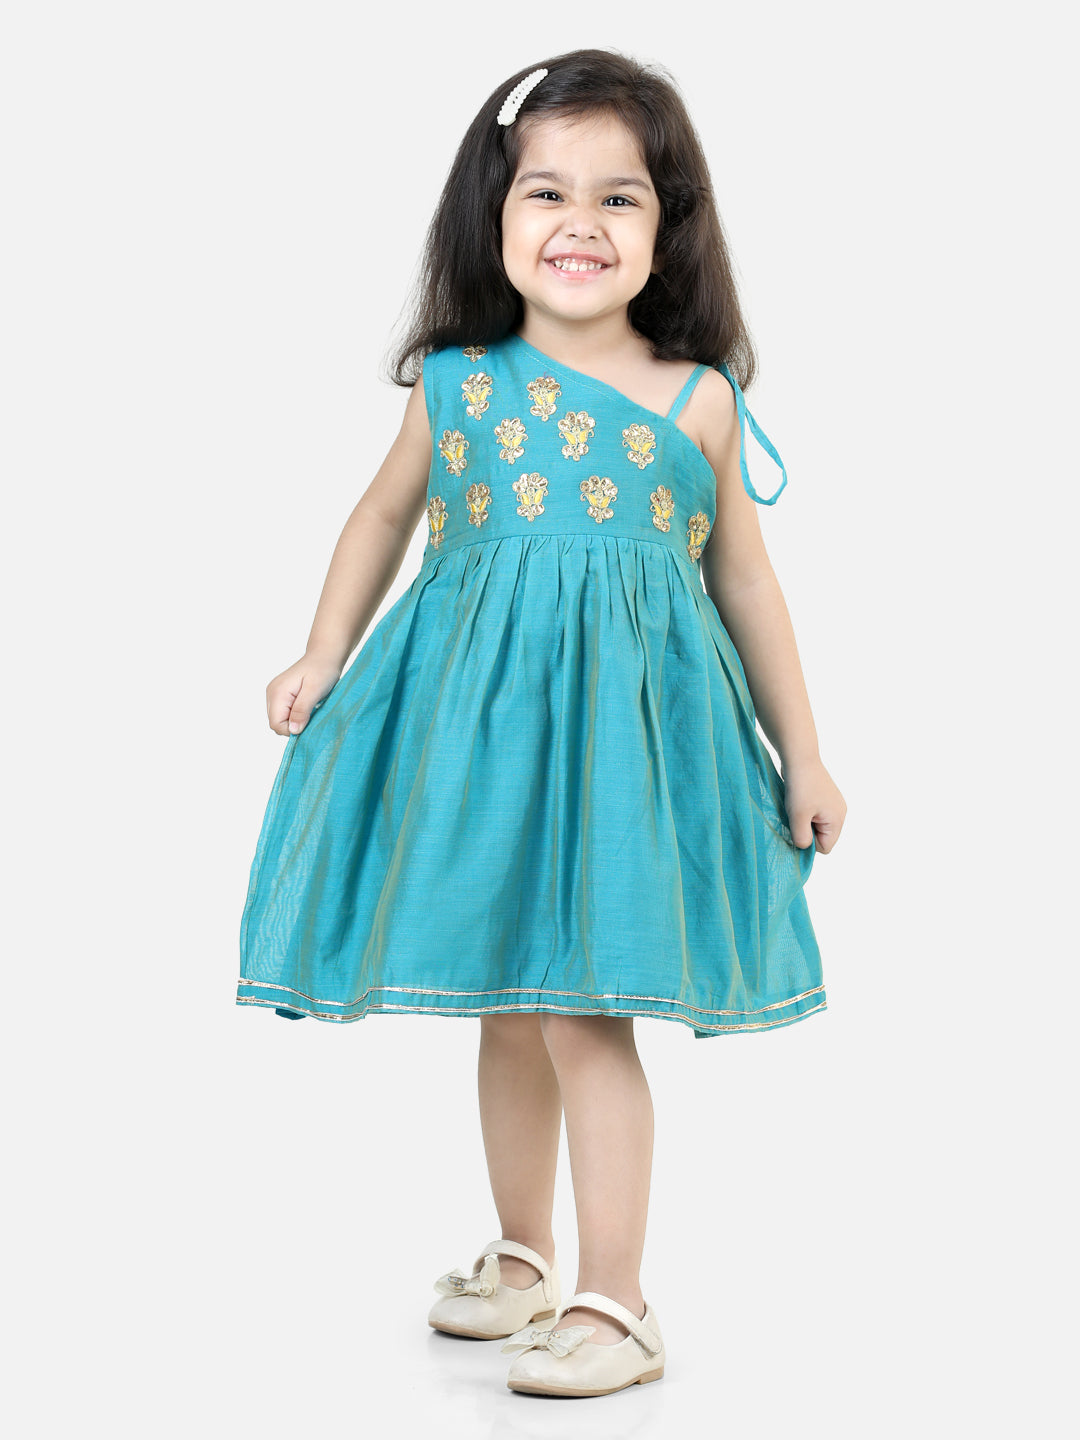 BownBee Girls Gota Patti Embroidery Chanderi Frock Party Dress - Teal